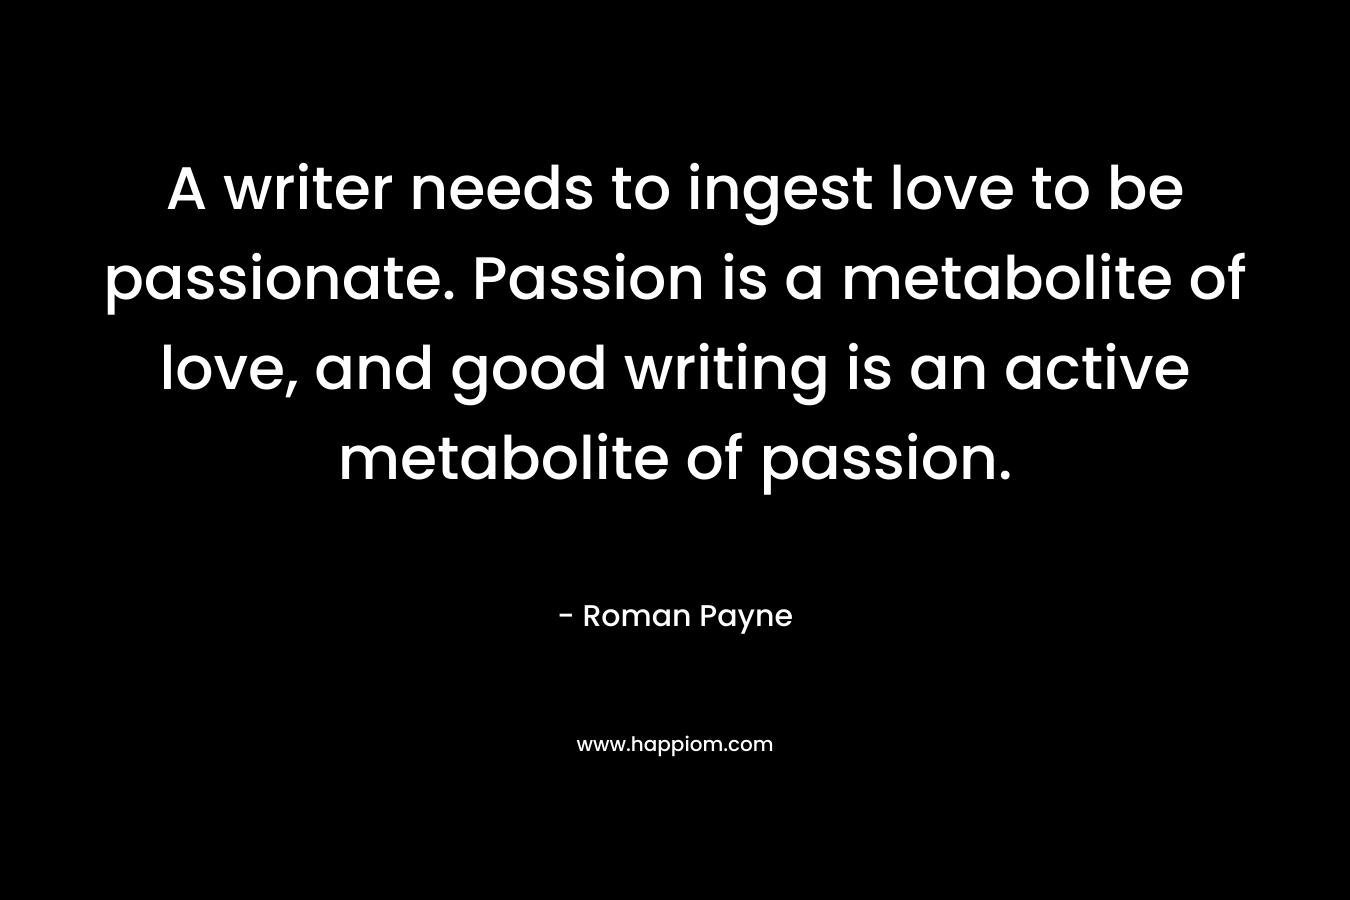 A writer needs to ingest love to be passionate. Passion is a metabolite of love, and good writing is an active metabolite of passion.